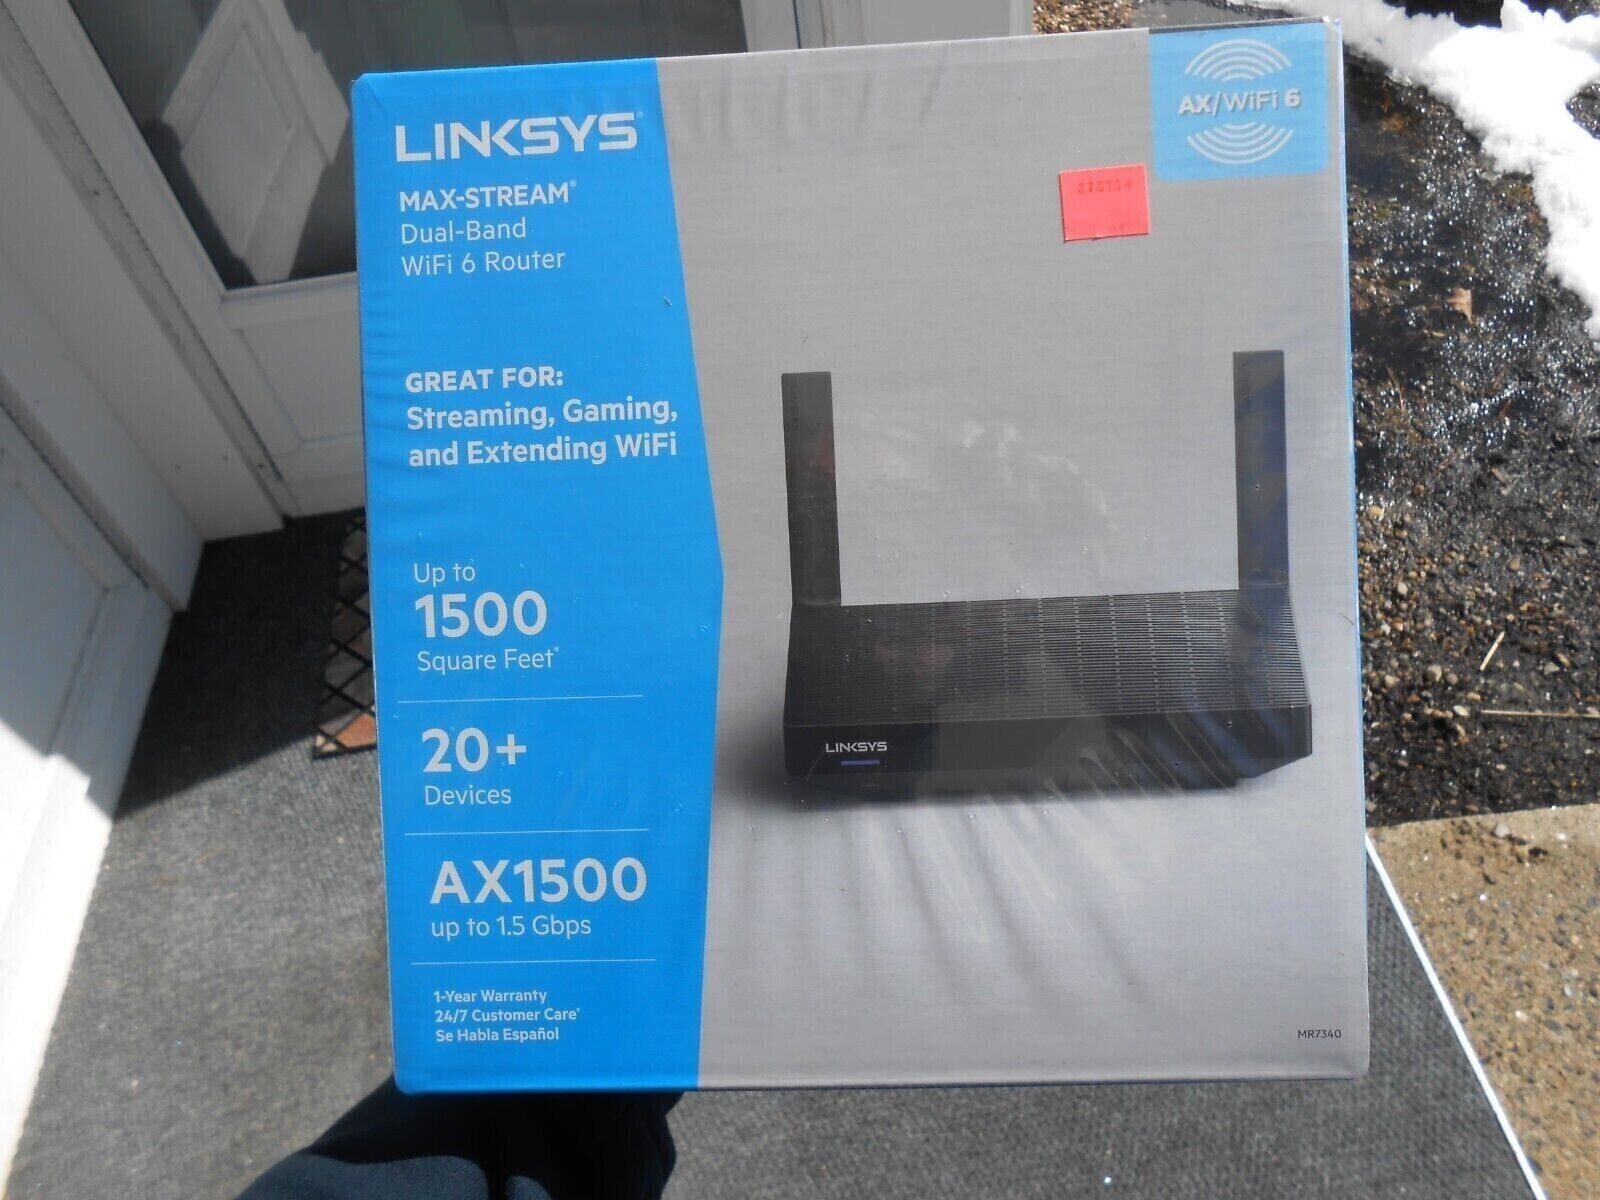 Linksys Max Stream Dual Band AX1500 WiFi 6 Router, Black (MR7340)